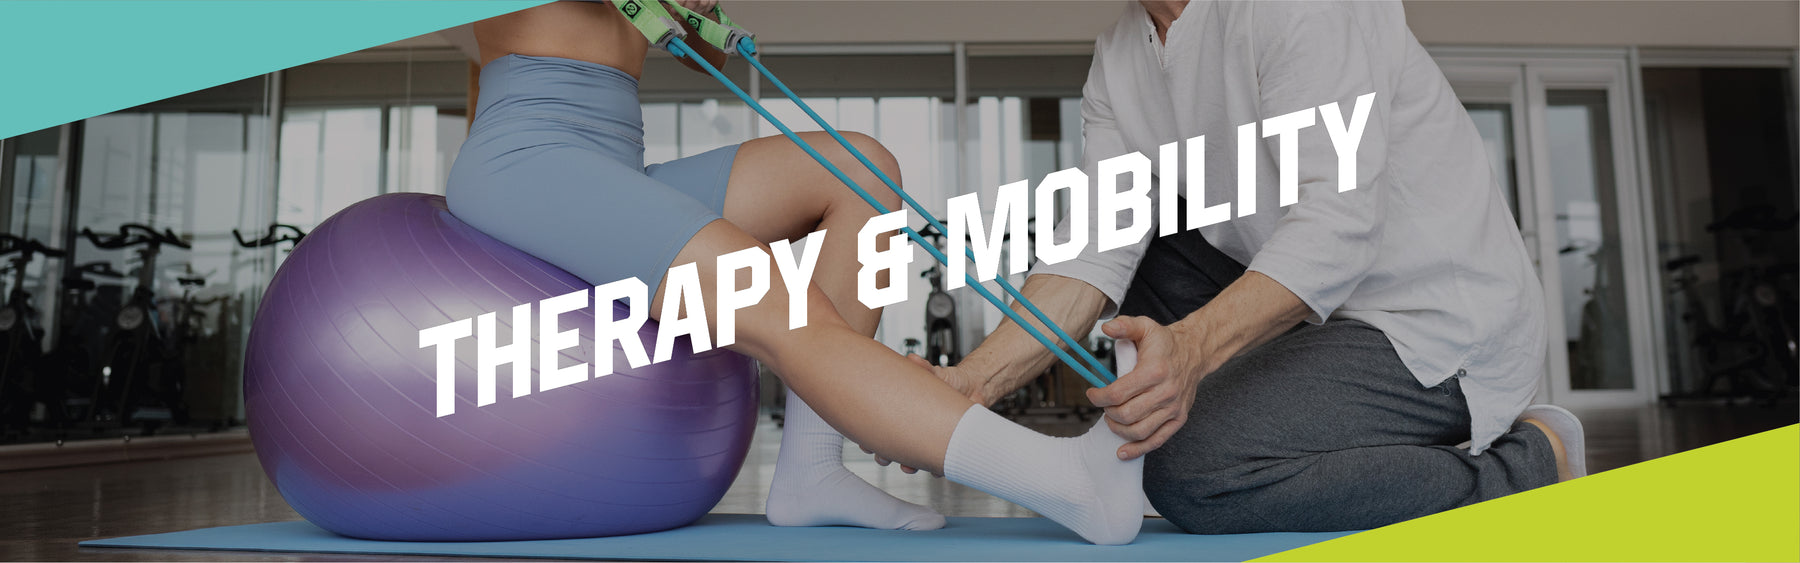 therapy & mobility